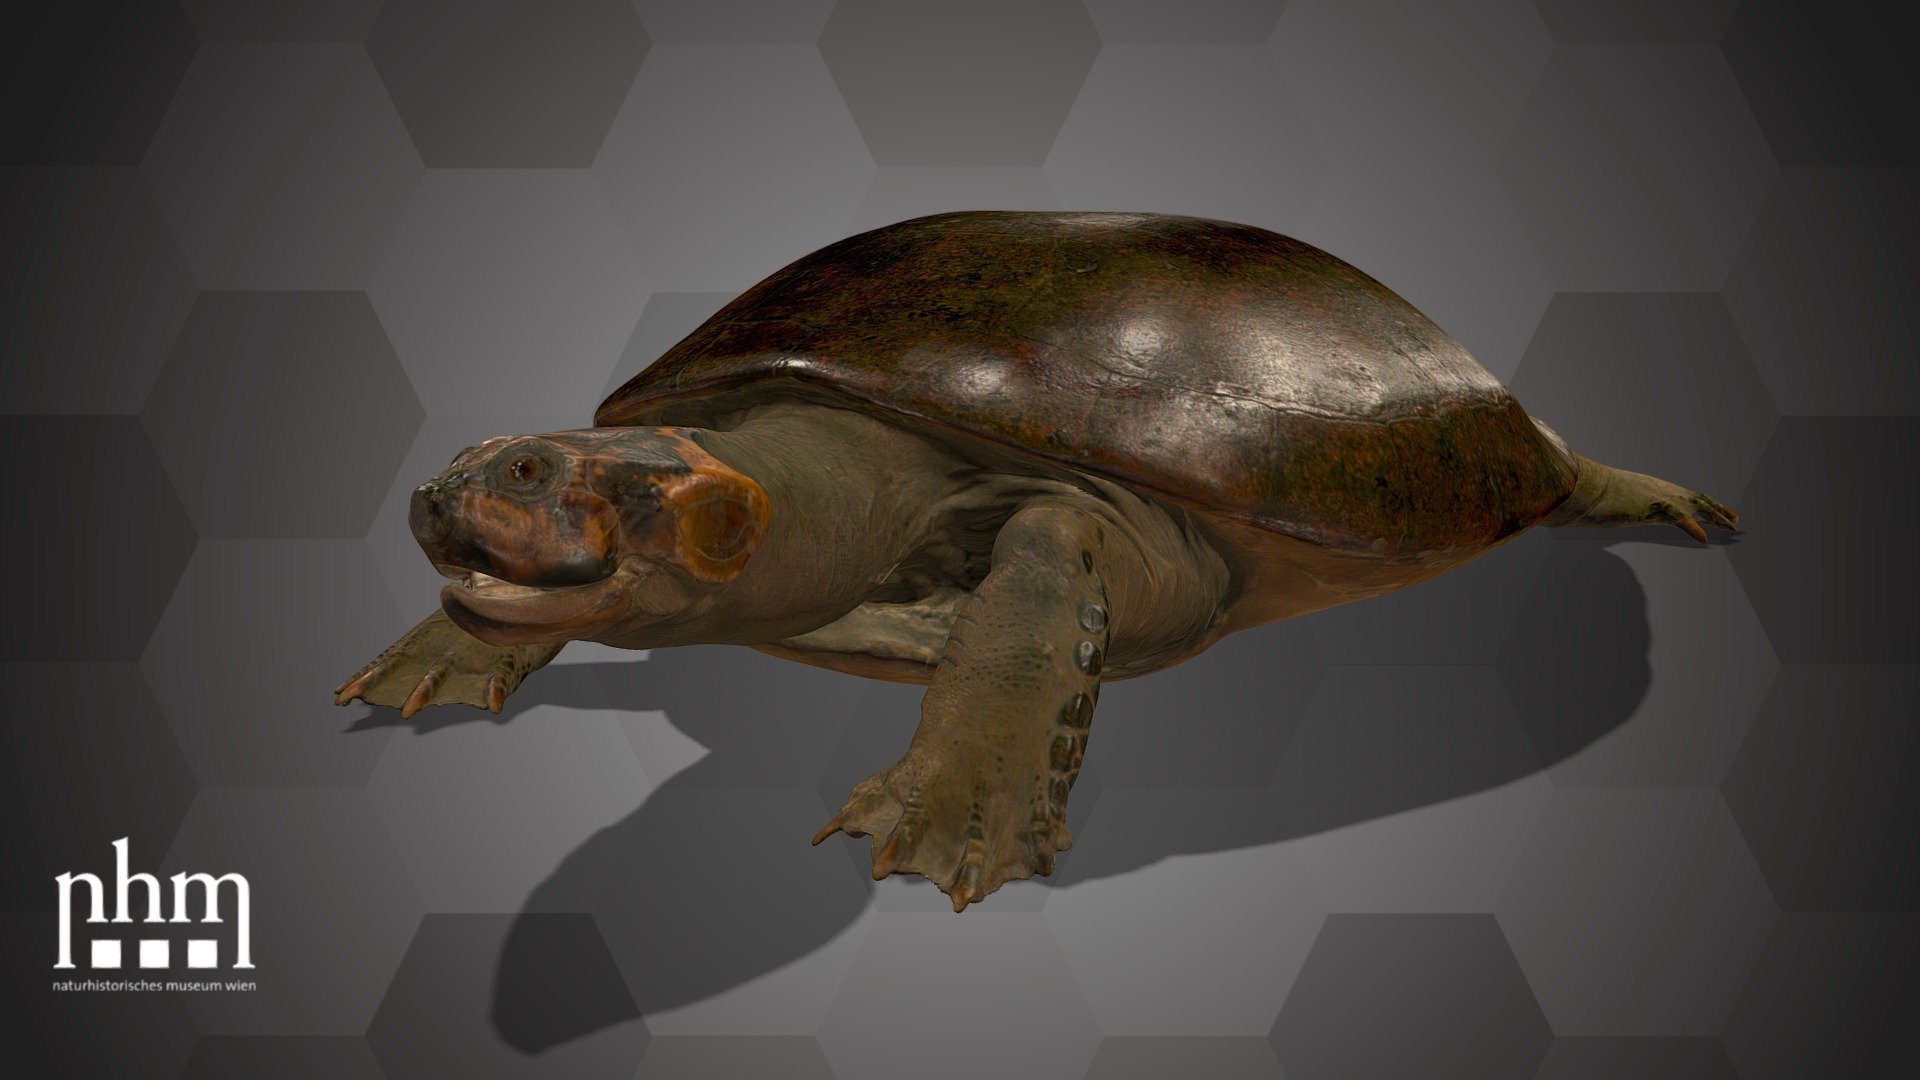 3D scan of an Arrau turtle (Podocnemis expansa). This specimen is an example for early taxidermy. This turtle was caught in 1832 on the banks of the Rio Solimões during an Austrian expedition in Brazil. It came to the NHM Vienna in 1834 and is one of a few found specimens of this rare species. Arrau turtles live in the wetland areas of South America and are among the largest freshwater turtles in the world. 

The Arrau turtle is Number 73 of the NHM Top 100 and can be found in Hall 28 of the NHM Vienna.

Specimen: Podocnemis expansa (Schweigger, 1812)

Inventory number: NHMW-Zoo-HS 1315

Collection: Natural History Museum Vienna, 1st Zoological Dept., Herpetology Coll. (curator: Silke Schweiger)

Find out more about the NHMW here.

Scanned and edited by Anna Haider &amp; Viola Winkler (NHMW)

Scanner: Artec Leo. Infrastructure funded by the FFG 3d model